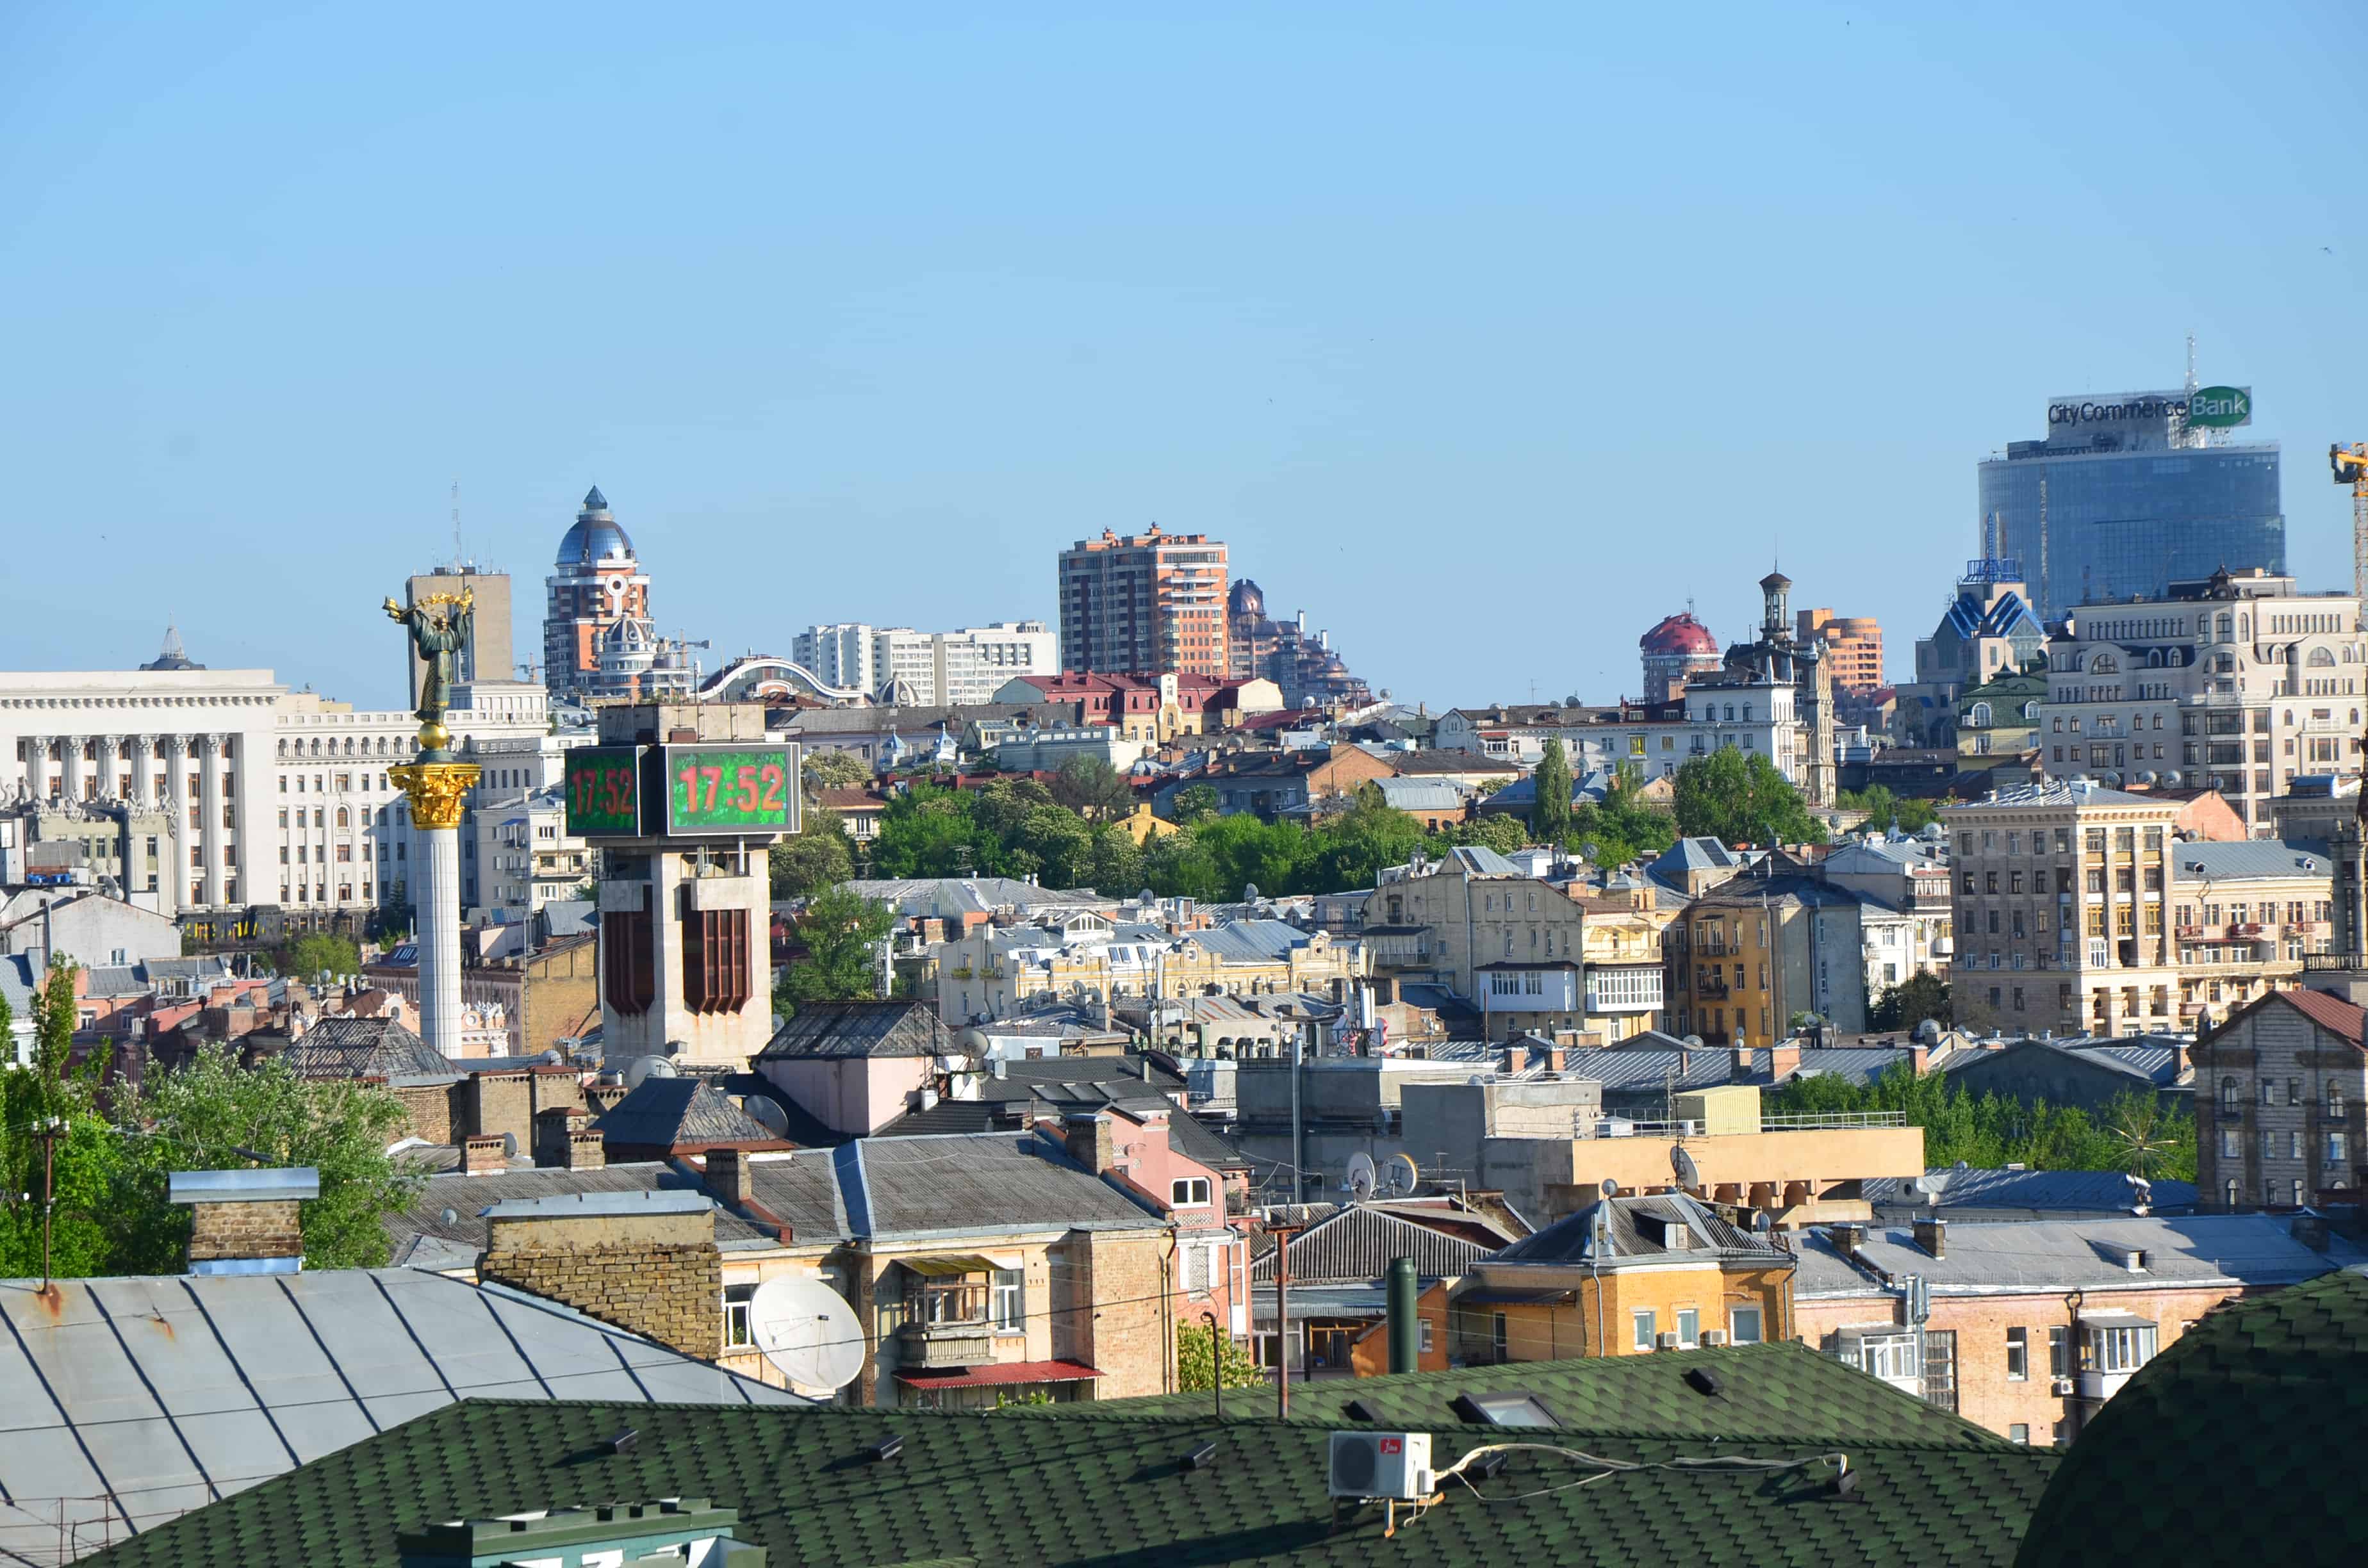 View of Kyiv from the bell tower at St. Michael's Golden-Domed Monastery in Kyiv, Ukraine